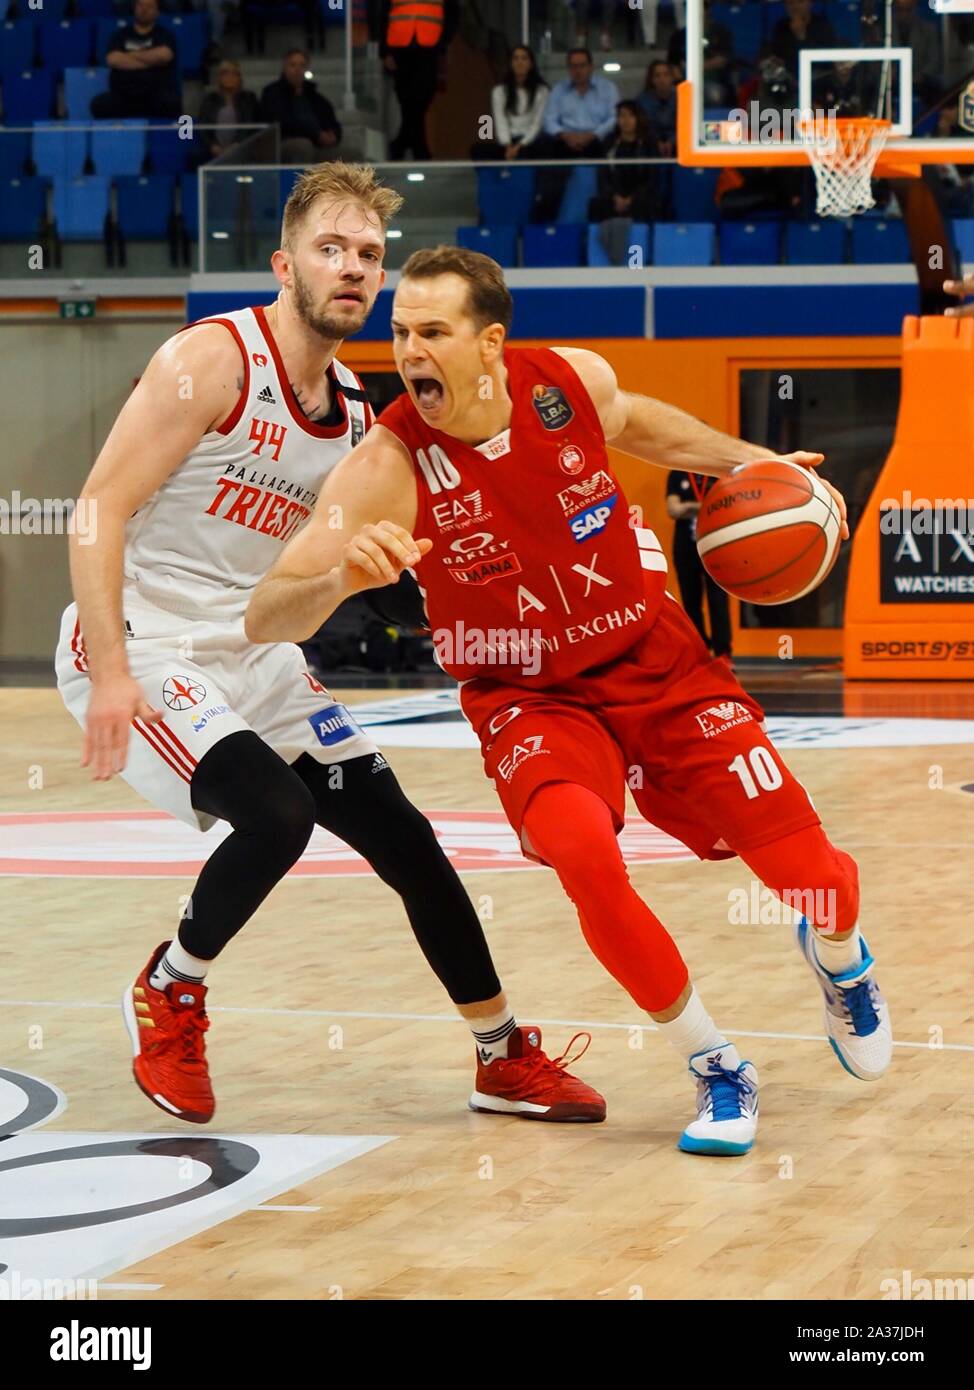 Milano, Italy, 06 Oct 2019, michael roll of  ax armani olimpia milano hampered by  justice of trieste   during Pallacanestro Trieste Vs A|x Armani Exchange Olimpia Milano  - Italian Basketball A Serie  Championship - Credit: LPS/Savino Paolella/Alamy Live News Stock Photo